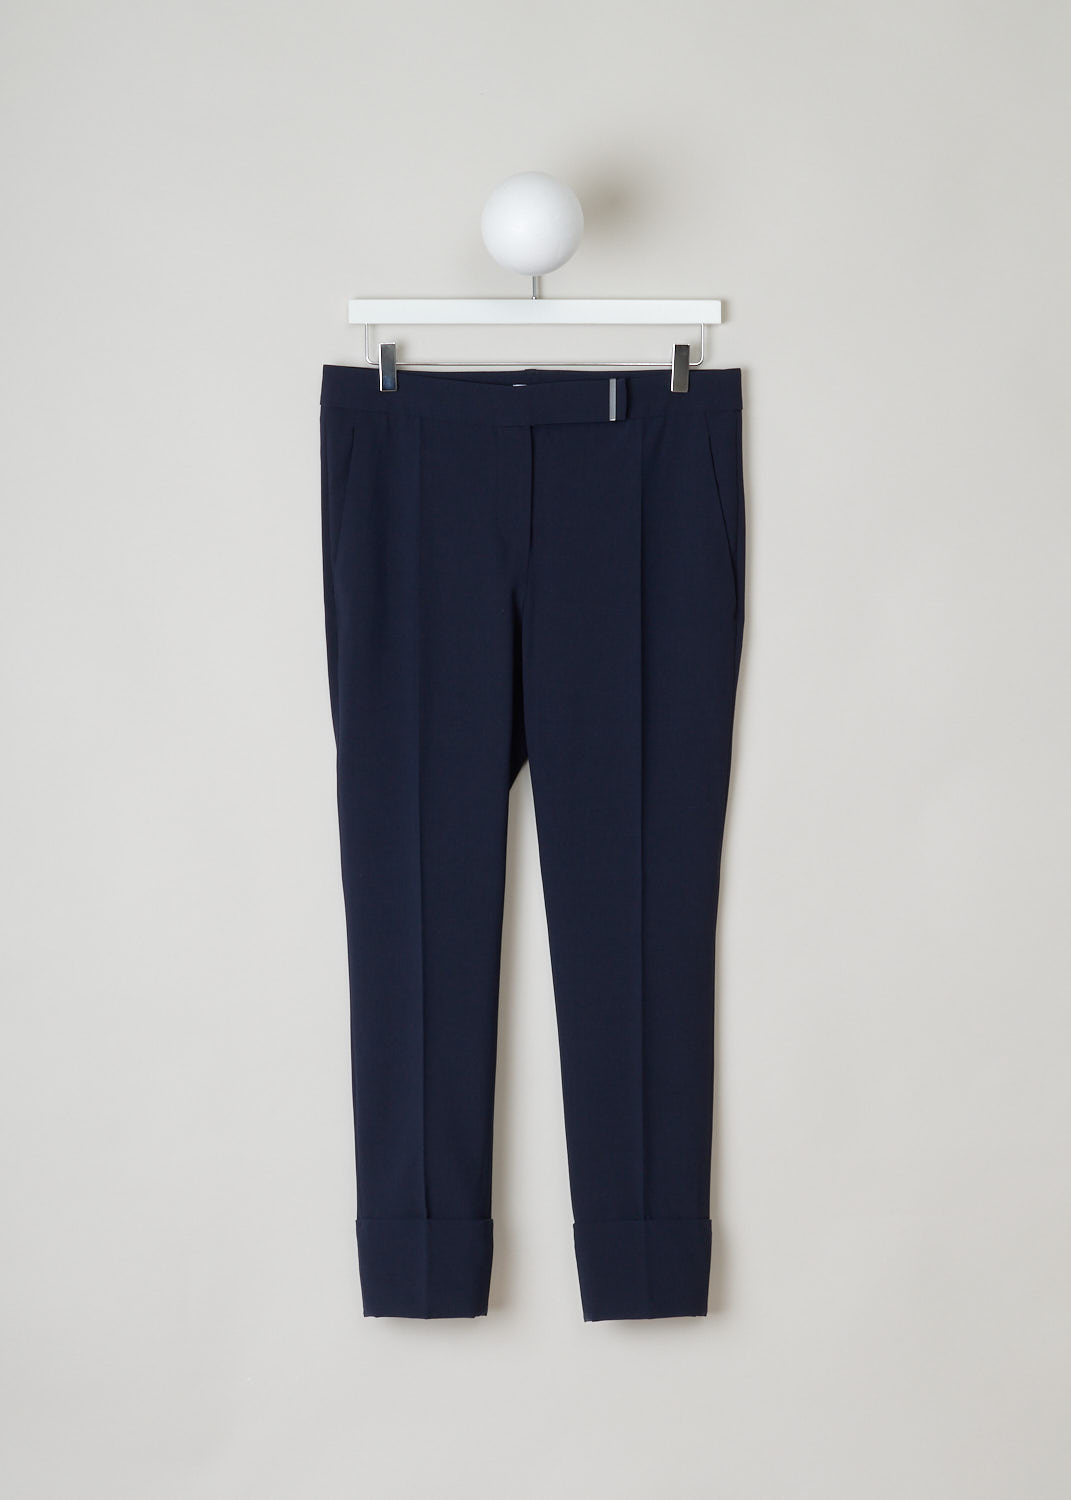 Brunello Cucinelli, midnight blue pants, MF533P6457_C2891, blue silver, front, Lovely wool navy pants. Featuring a cropped length with a wide turn up. The front has two slant pockets, the back has two welt pockets. The waistband has a metal detail for closure, with a push button and a French bearer button at the inside. 